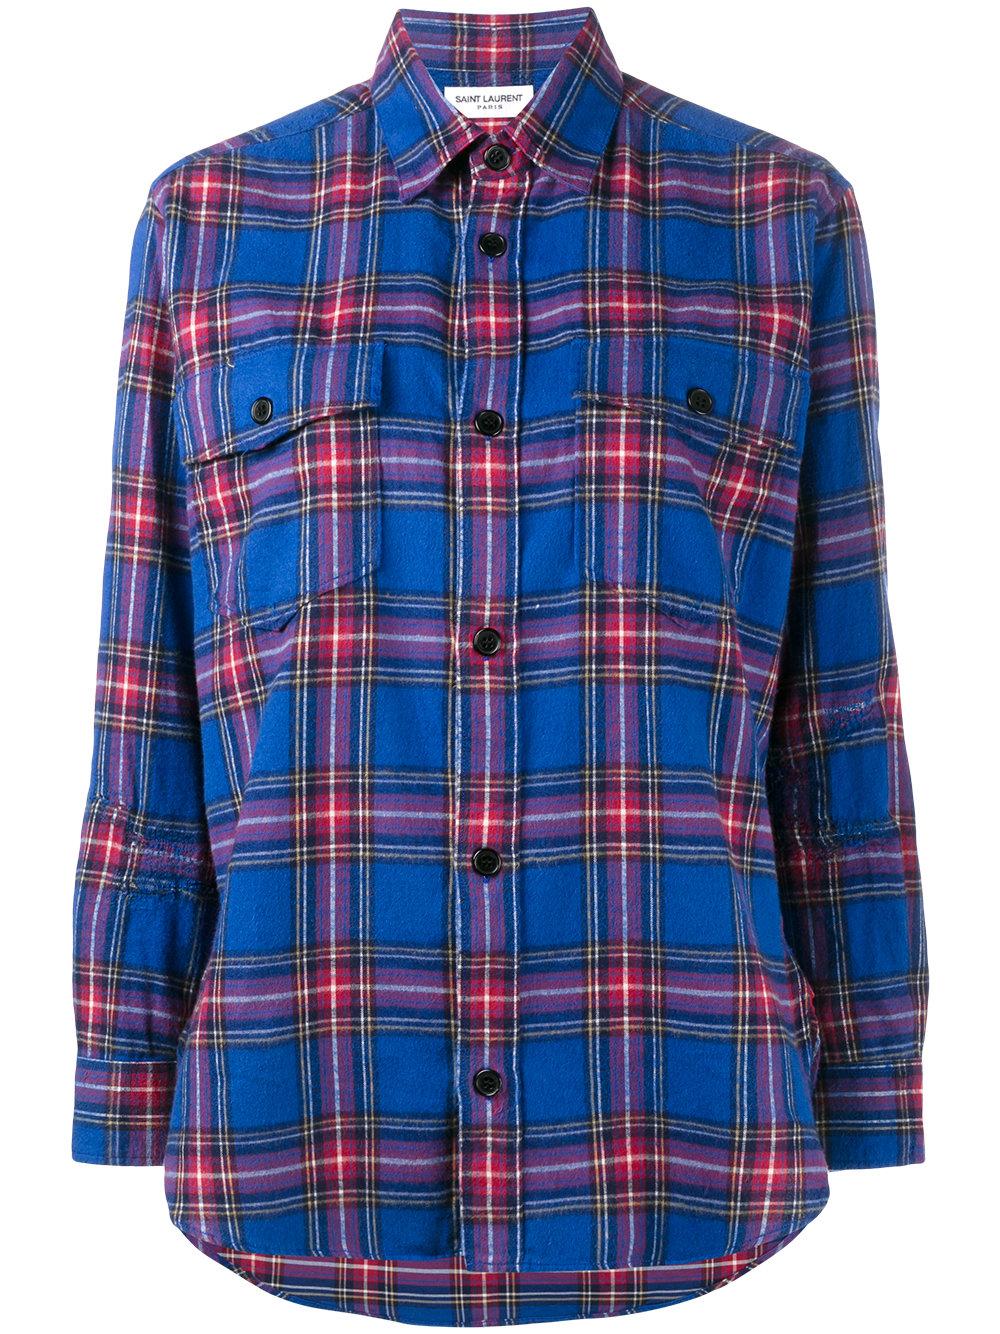 Saint laurent Checked Shirt in Blue | Lyst